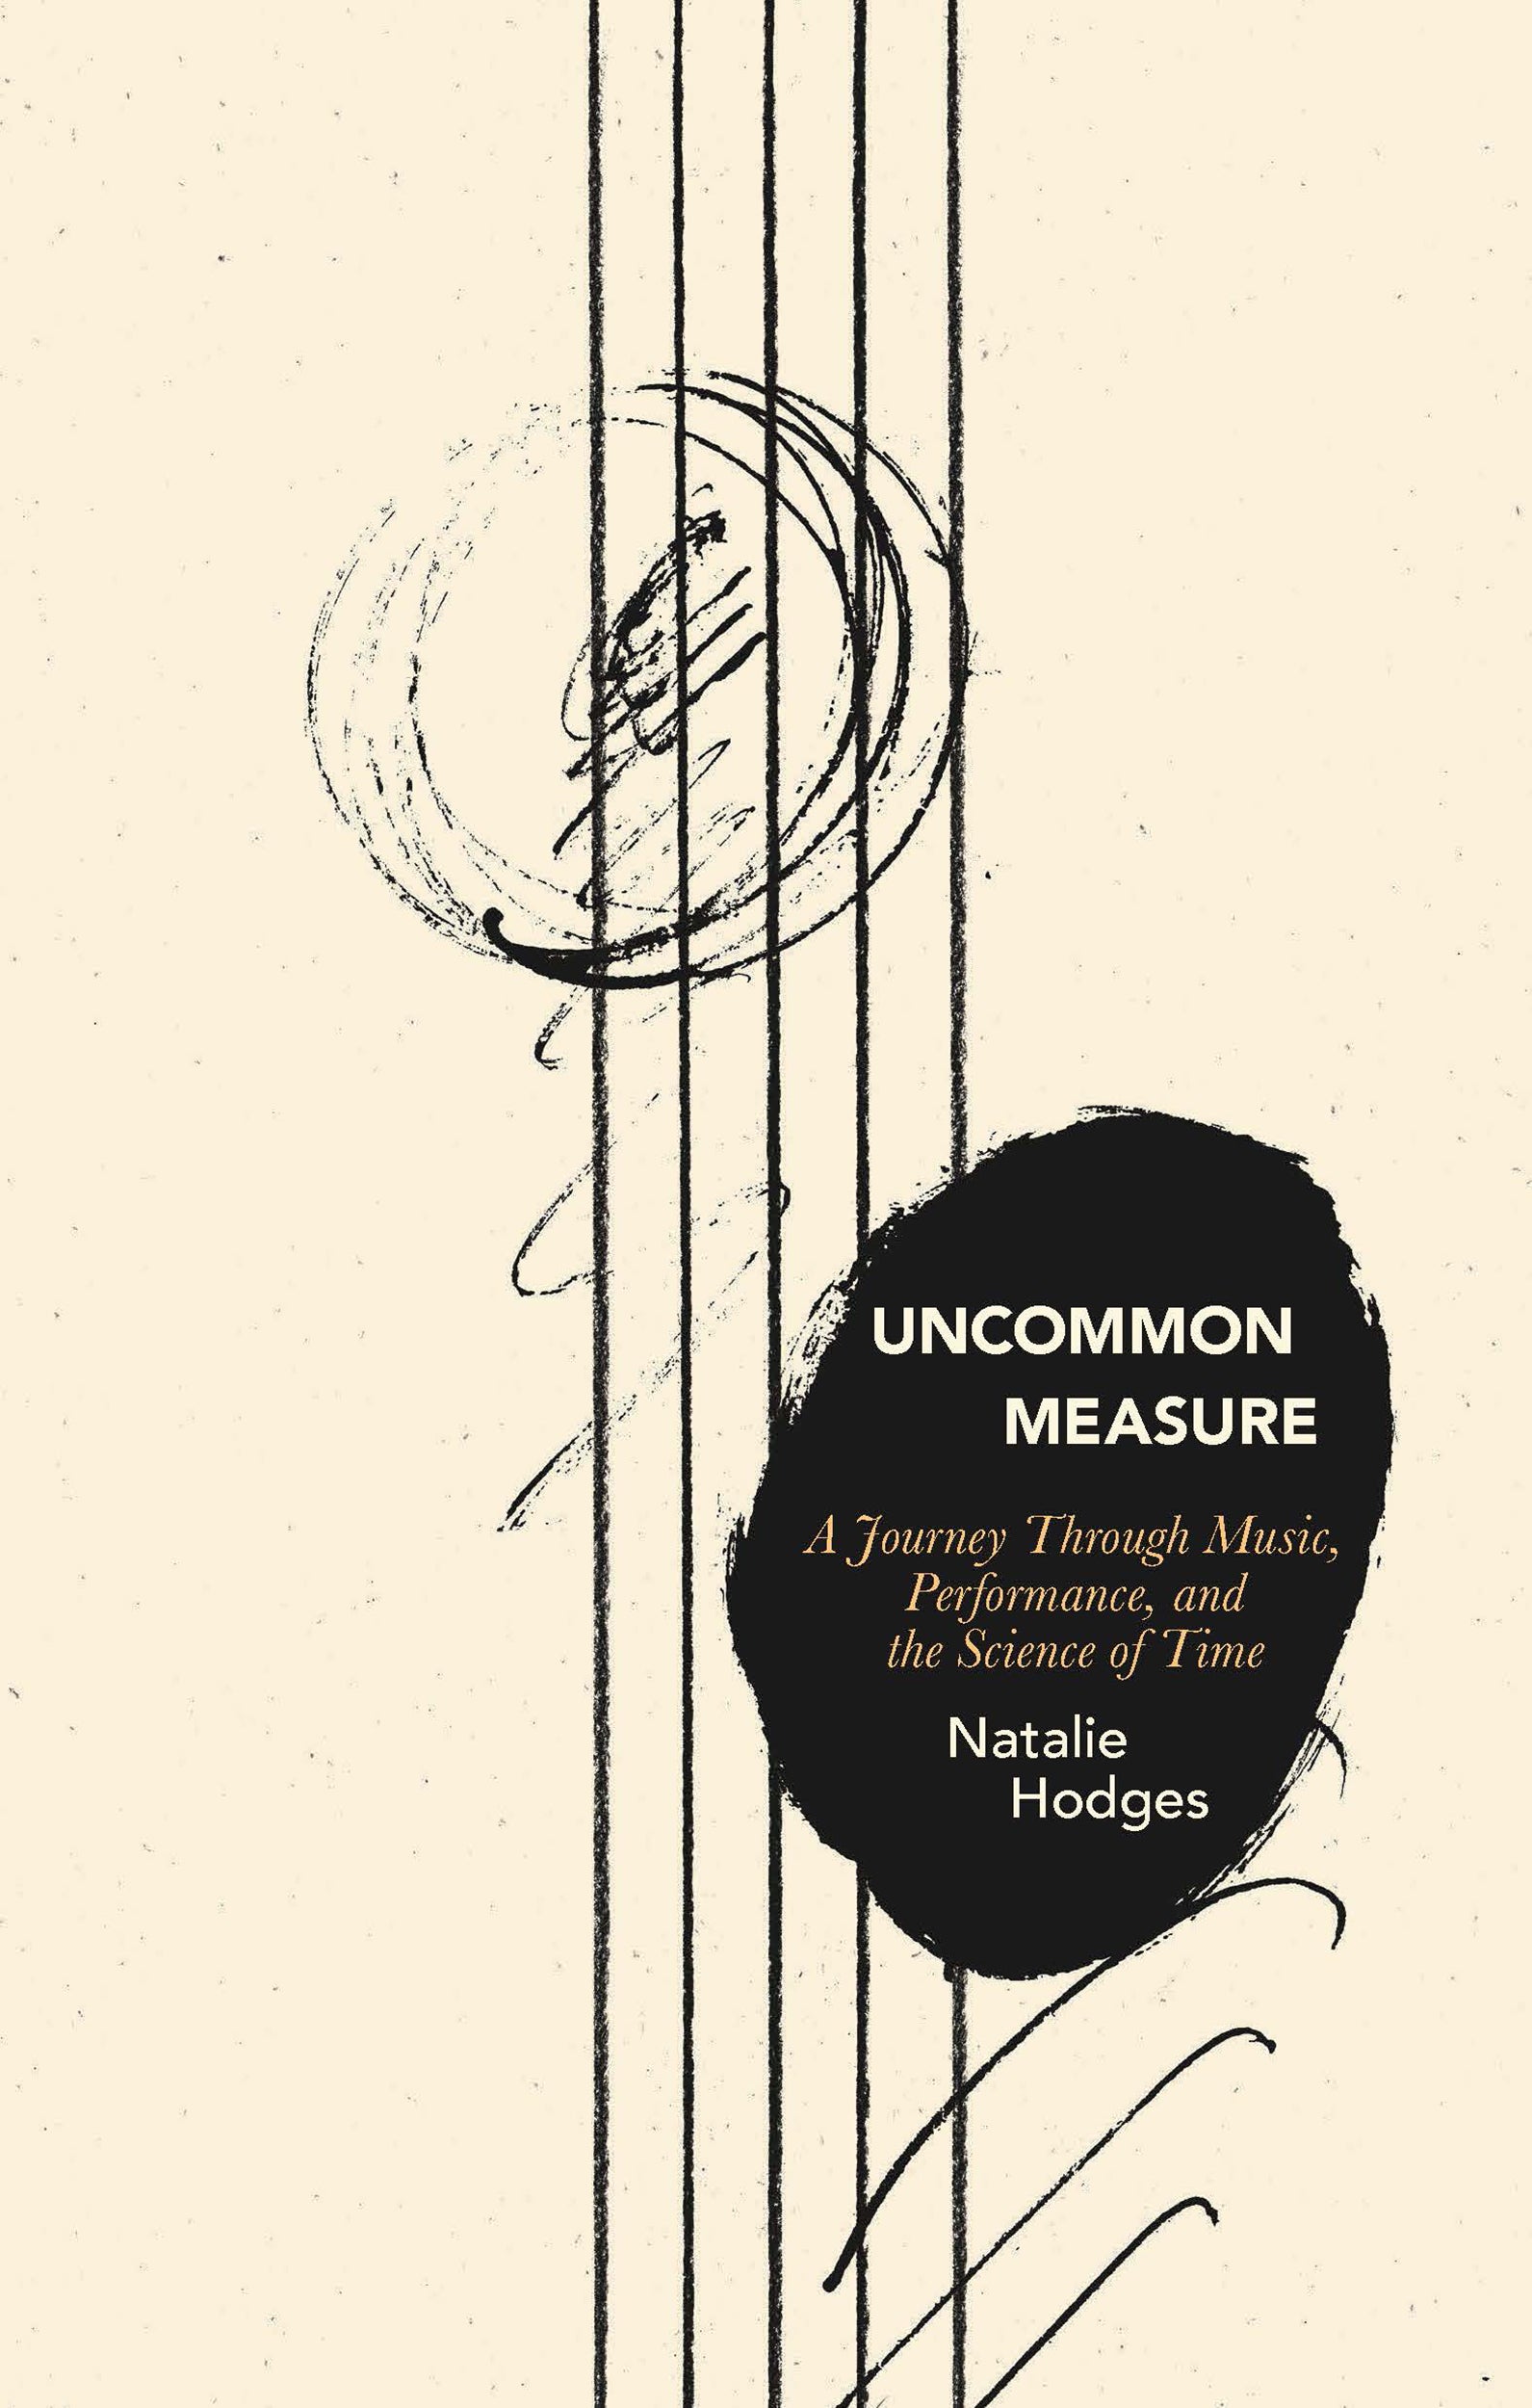 Cover of Natalie Hodges' book.